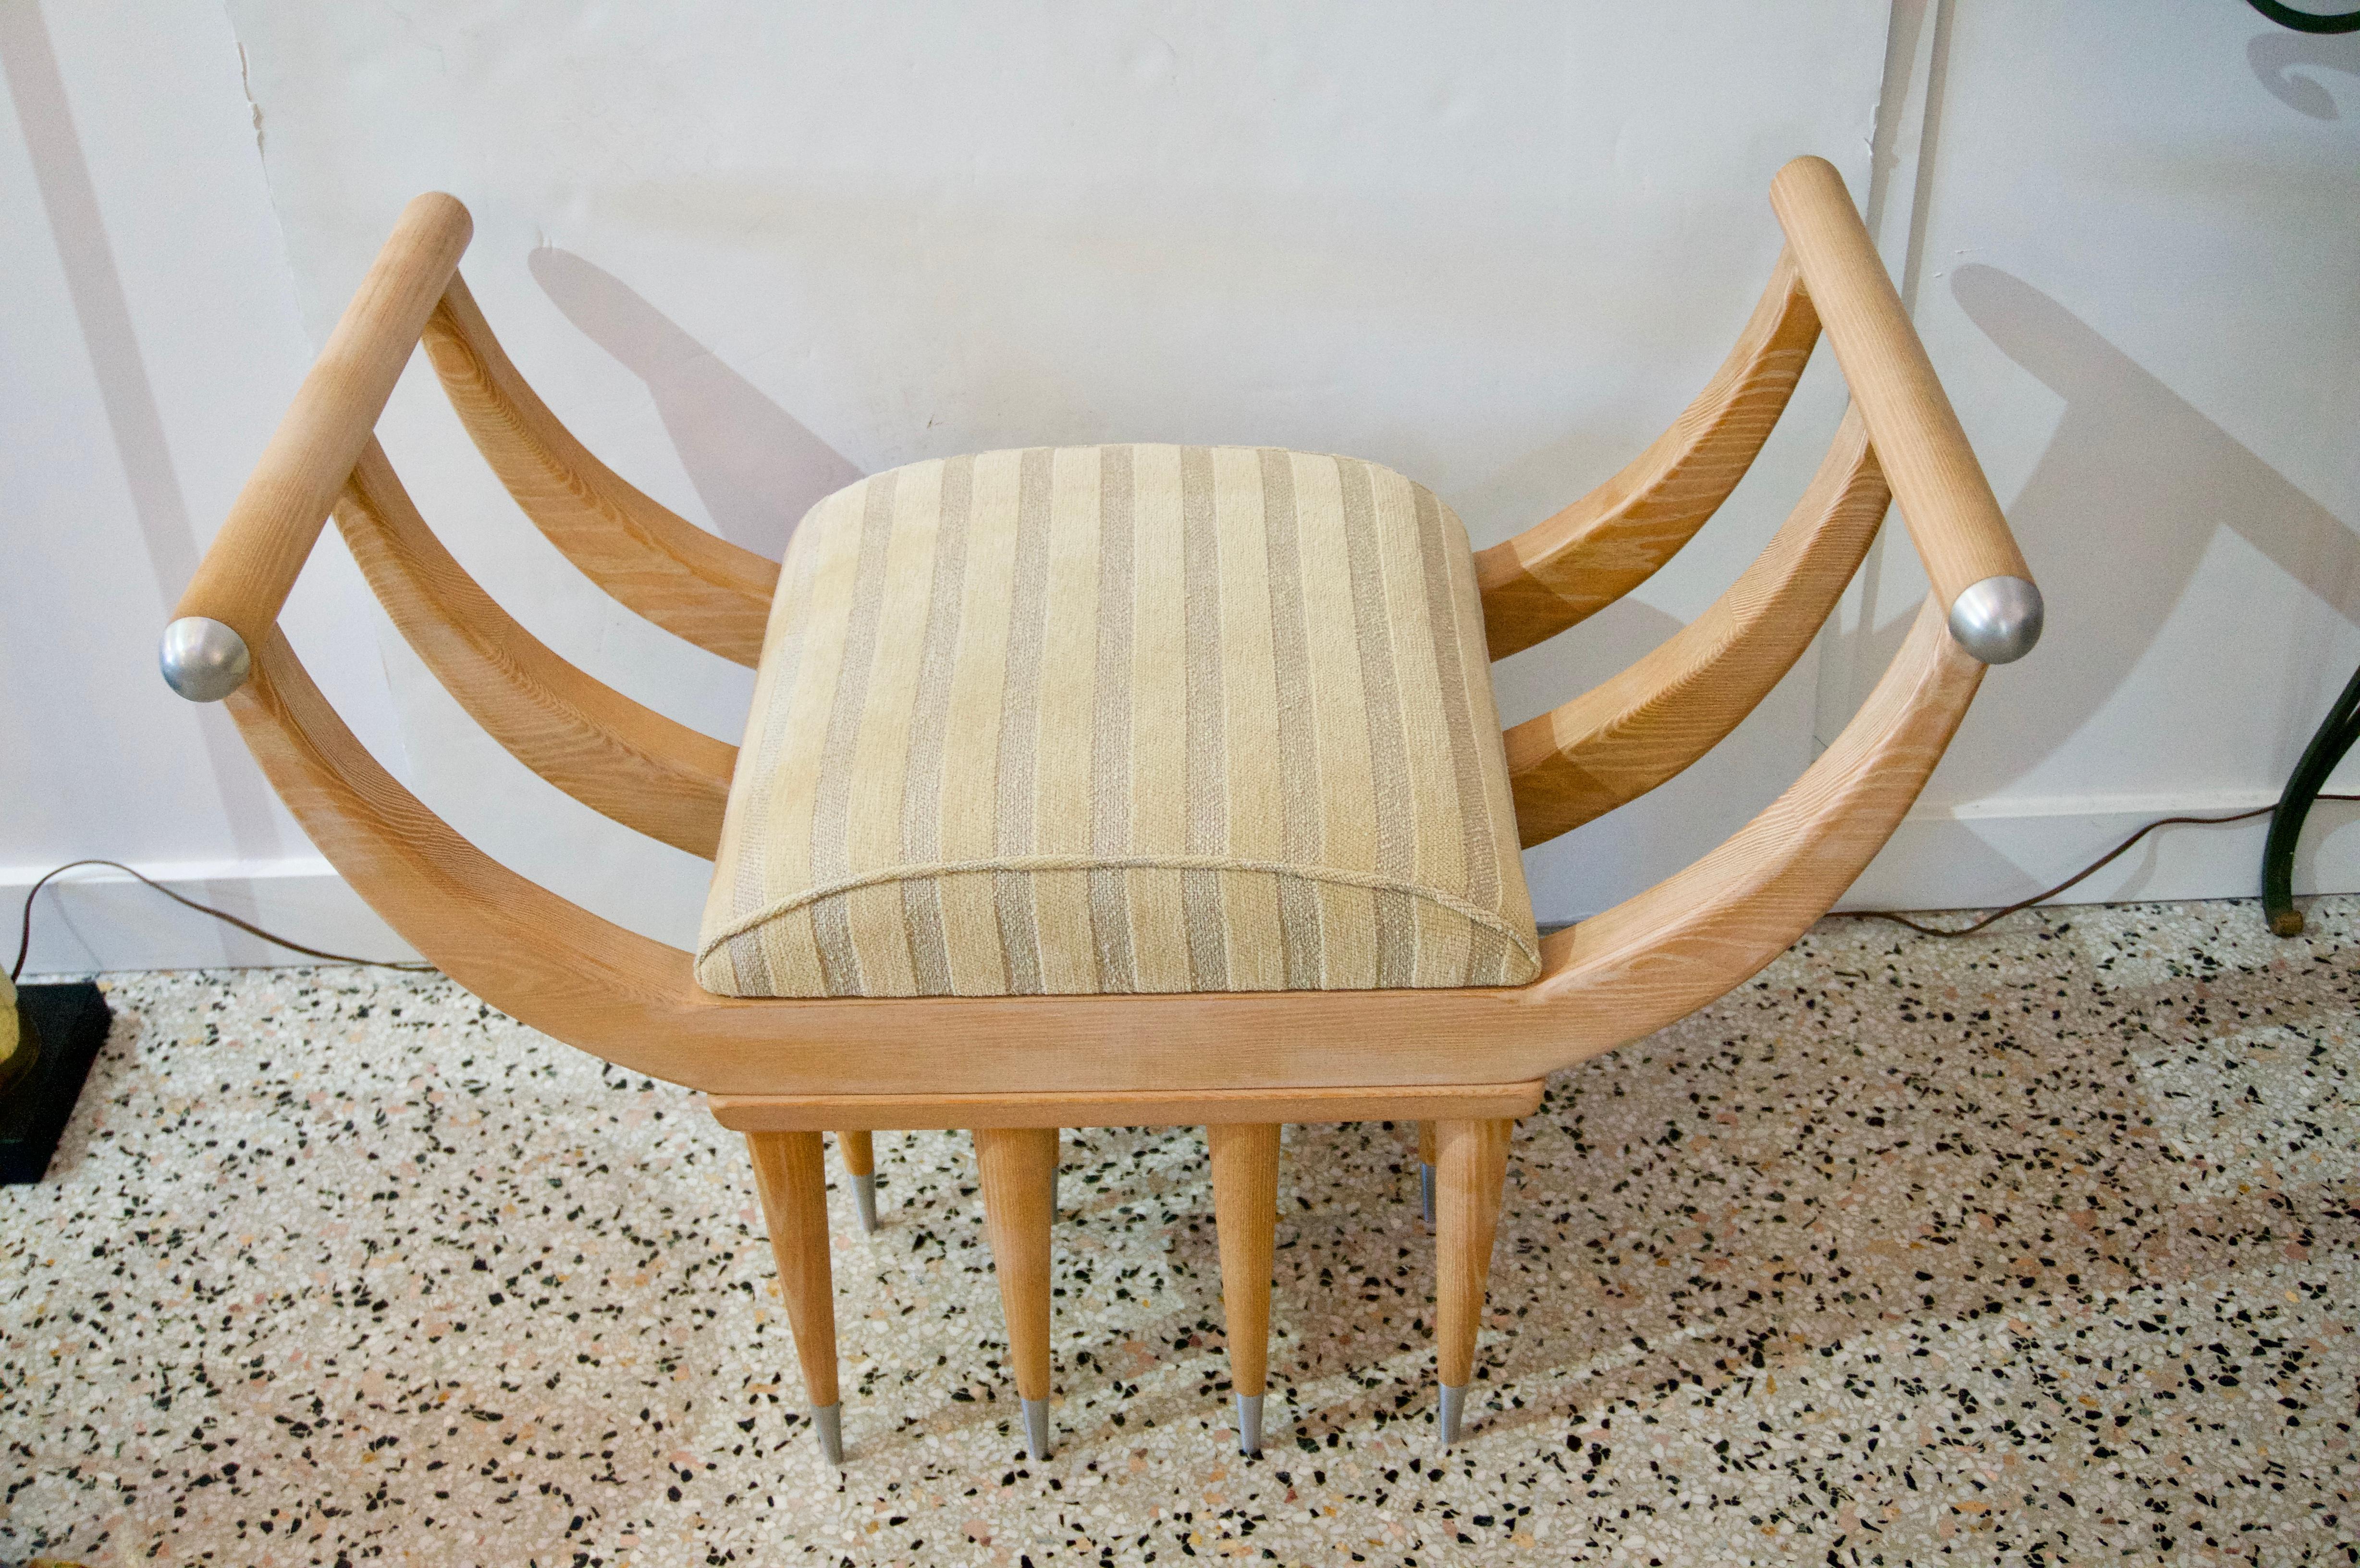 This stylish and very chic bench was custom designed and was acquired from a Palm Beach estate and will make a definite statement with its one-of-a-kind form and finish.

The piece is fabricated in oak with stainless steel accents.

Note: The